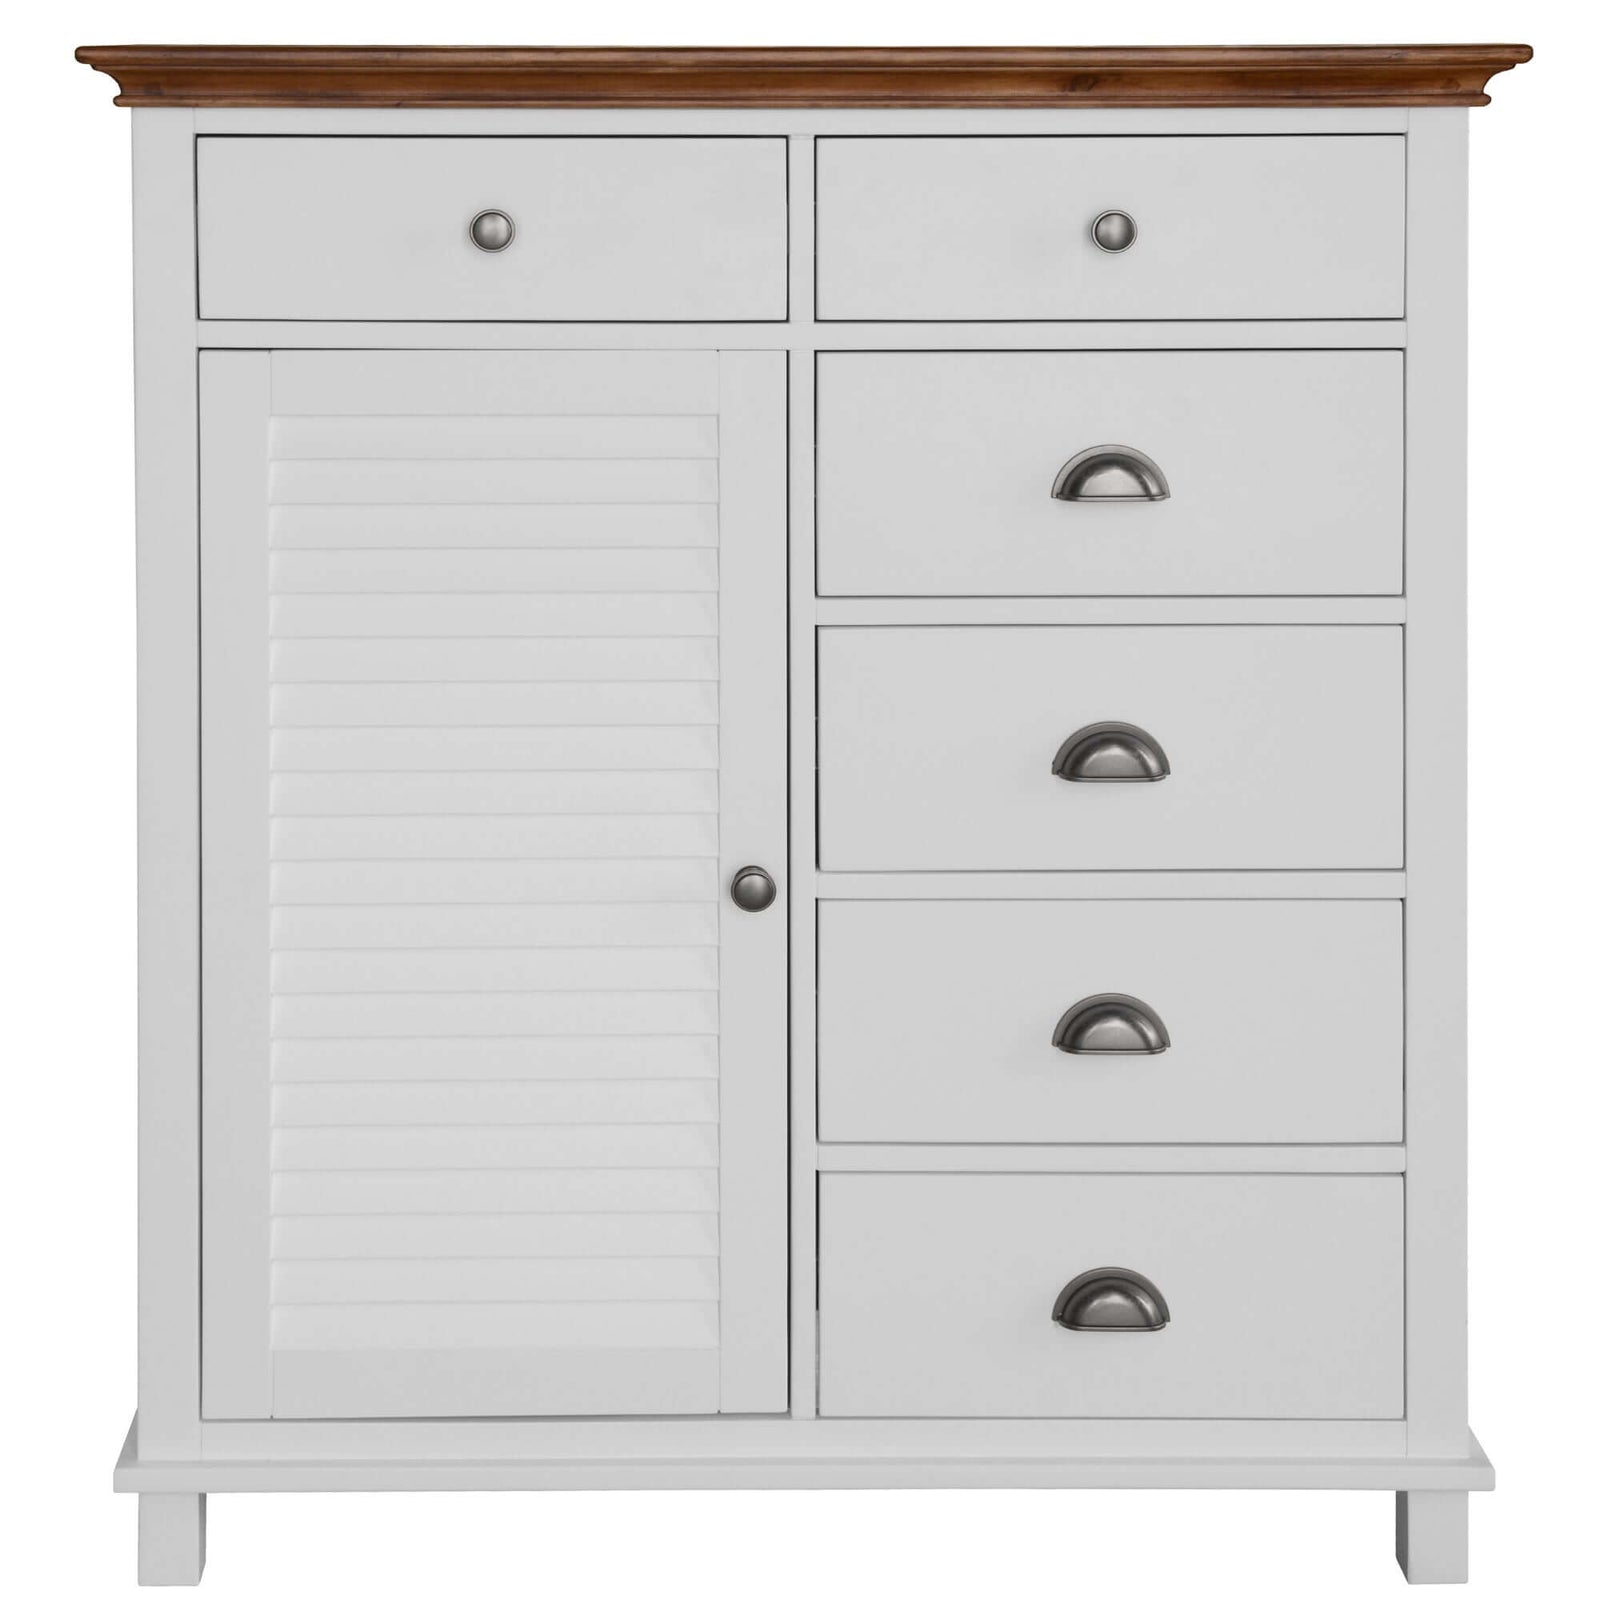 Virginia Tallboy 6 Chest of Drawers Solid Pine Wood Bed Storage Cabinet - White-Upinteriors